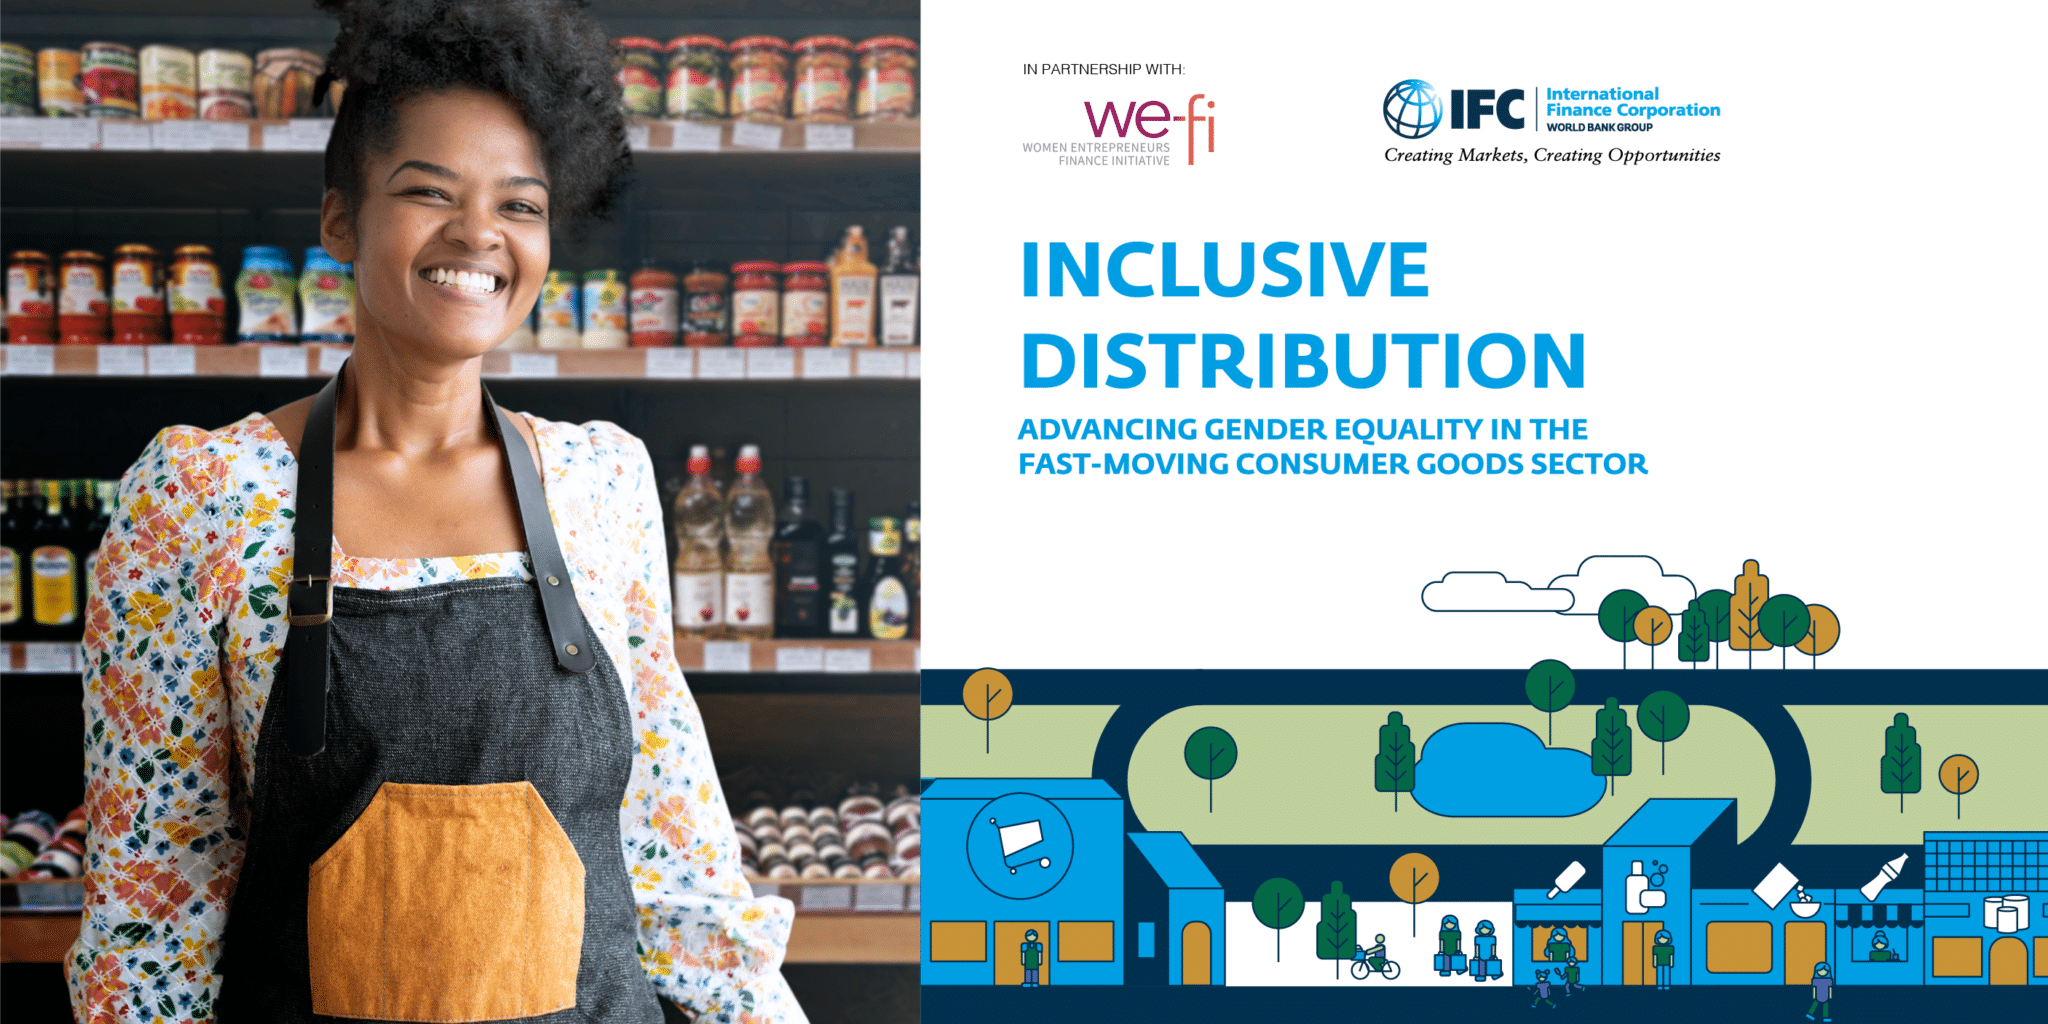 Advancing Gender Equality in the Fast Moving Consumer Goods sector